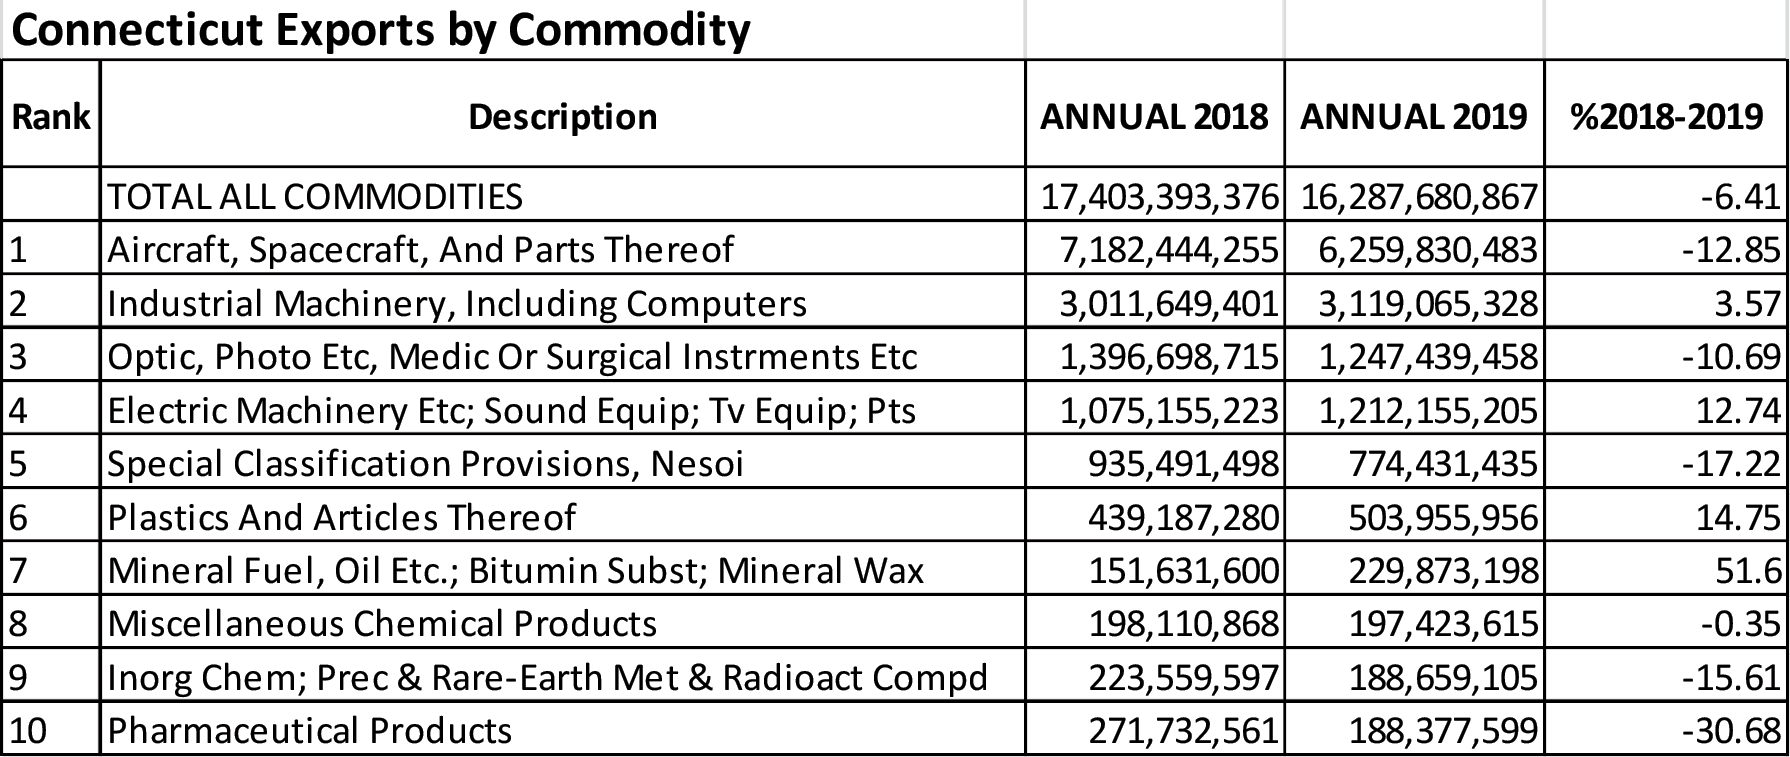 Chart 2. Connecticut Exports by Commodity